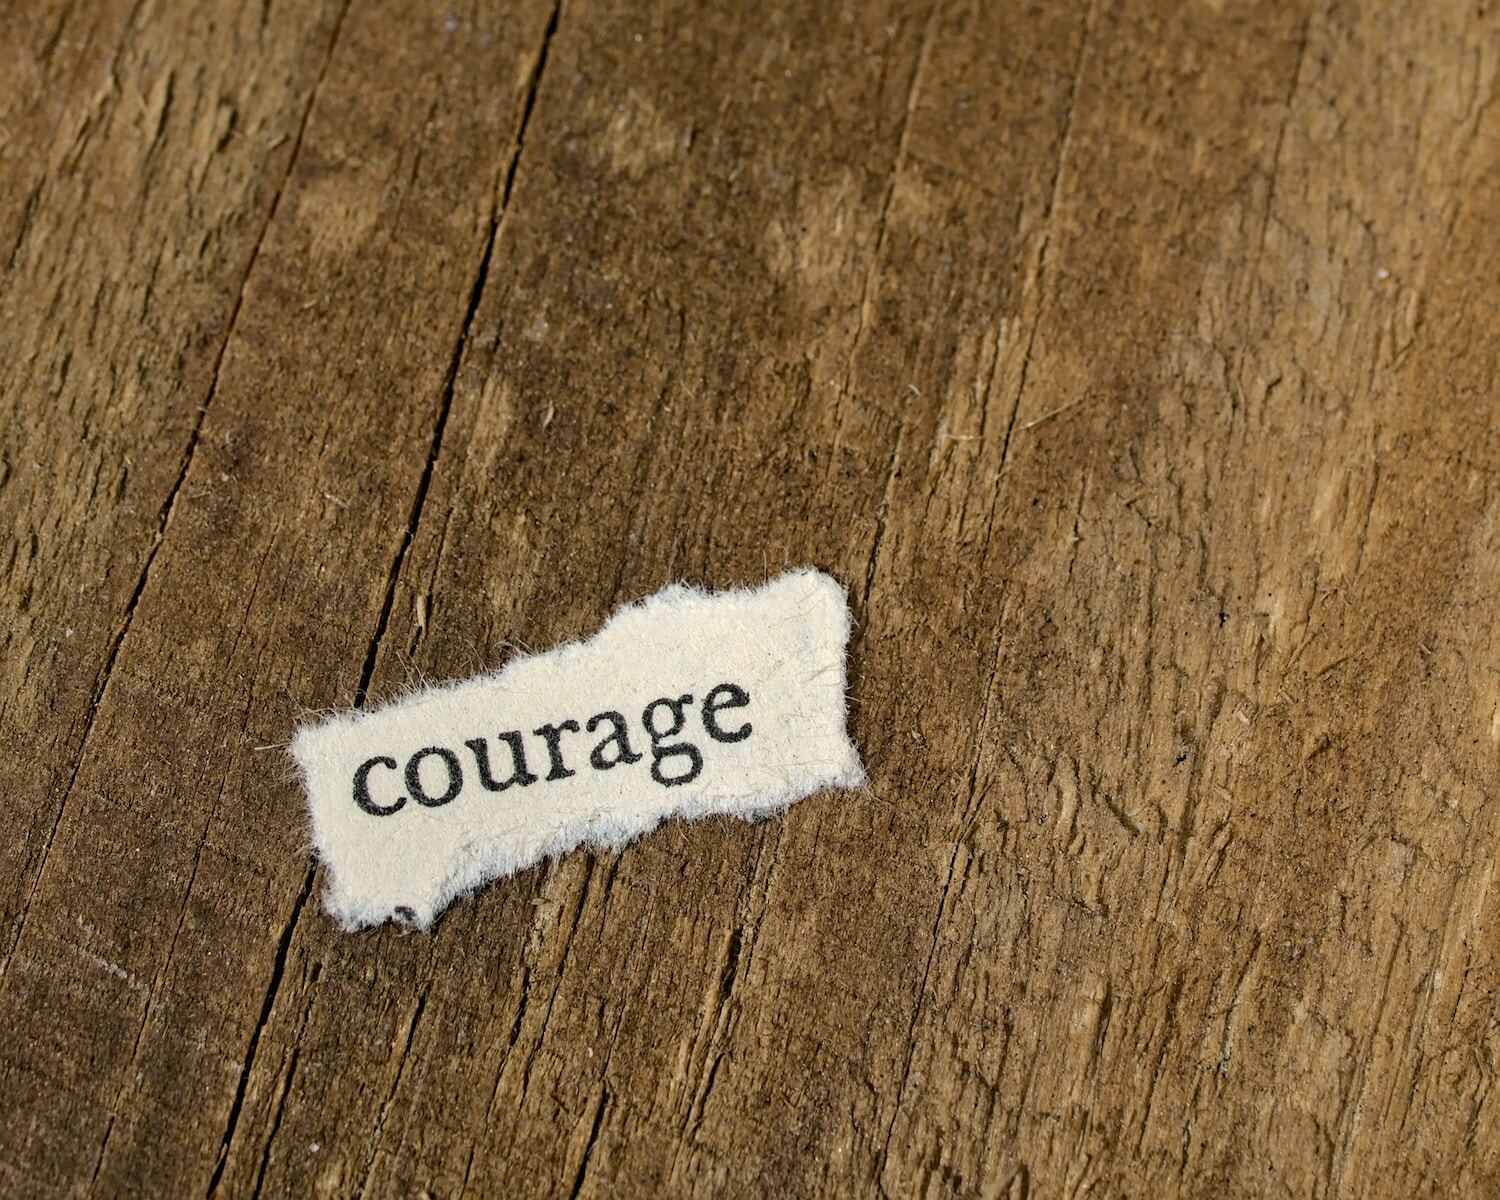 A Leader’s Values: Courage